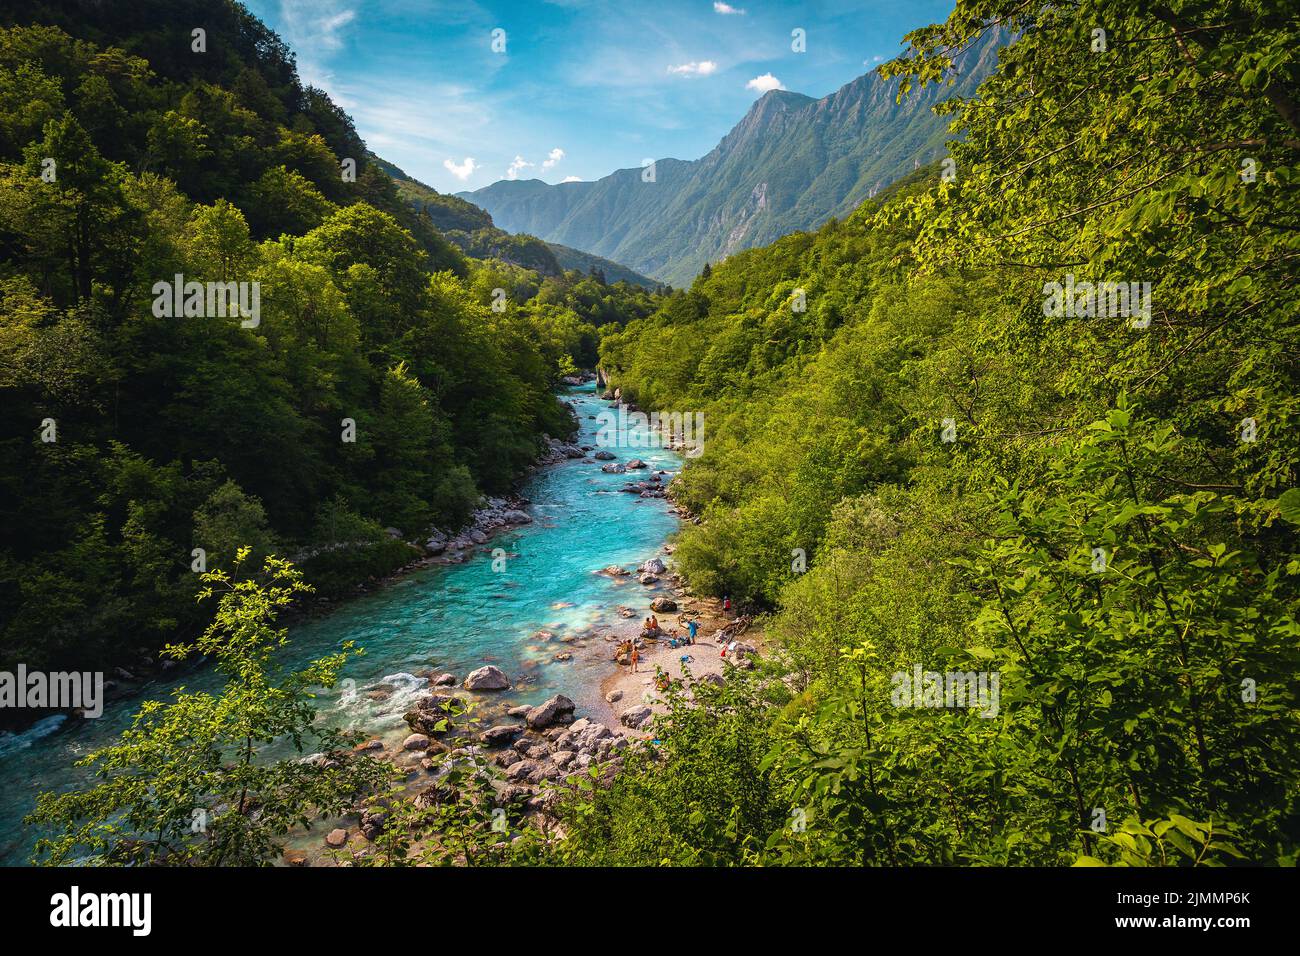 Fantastic nature scenery and kayaking destination. Stunning winding Soca river with rocky shoreline in the green forest, Kobarid, Slovenia, Europe Stock Photo